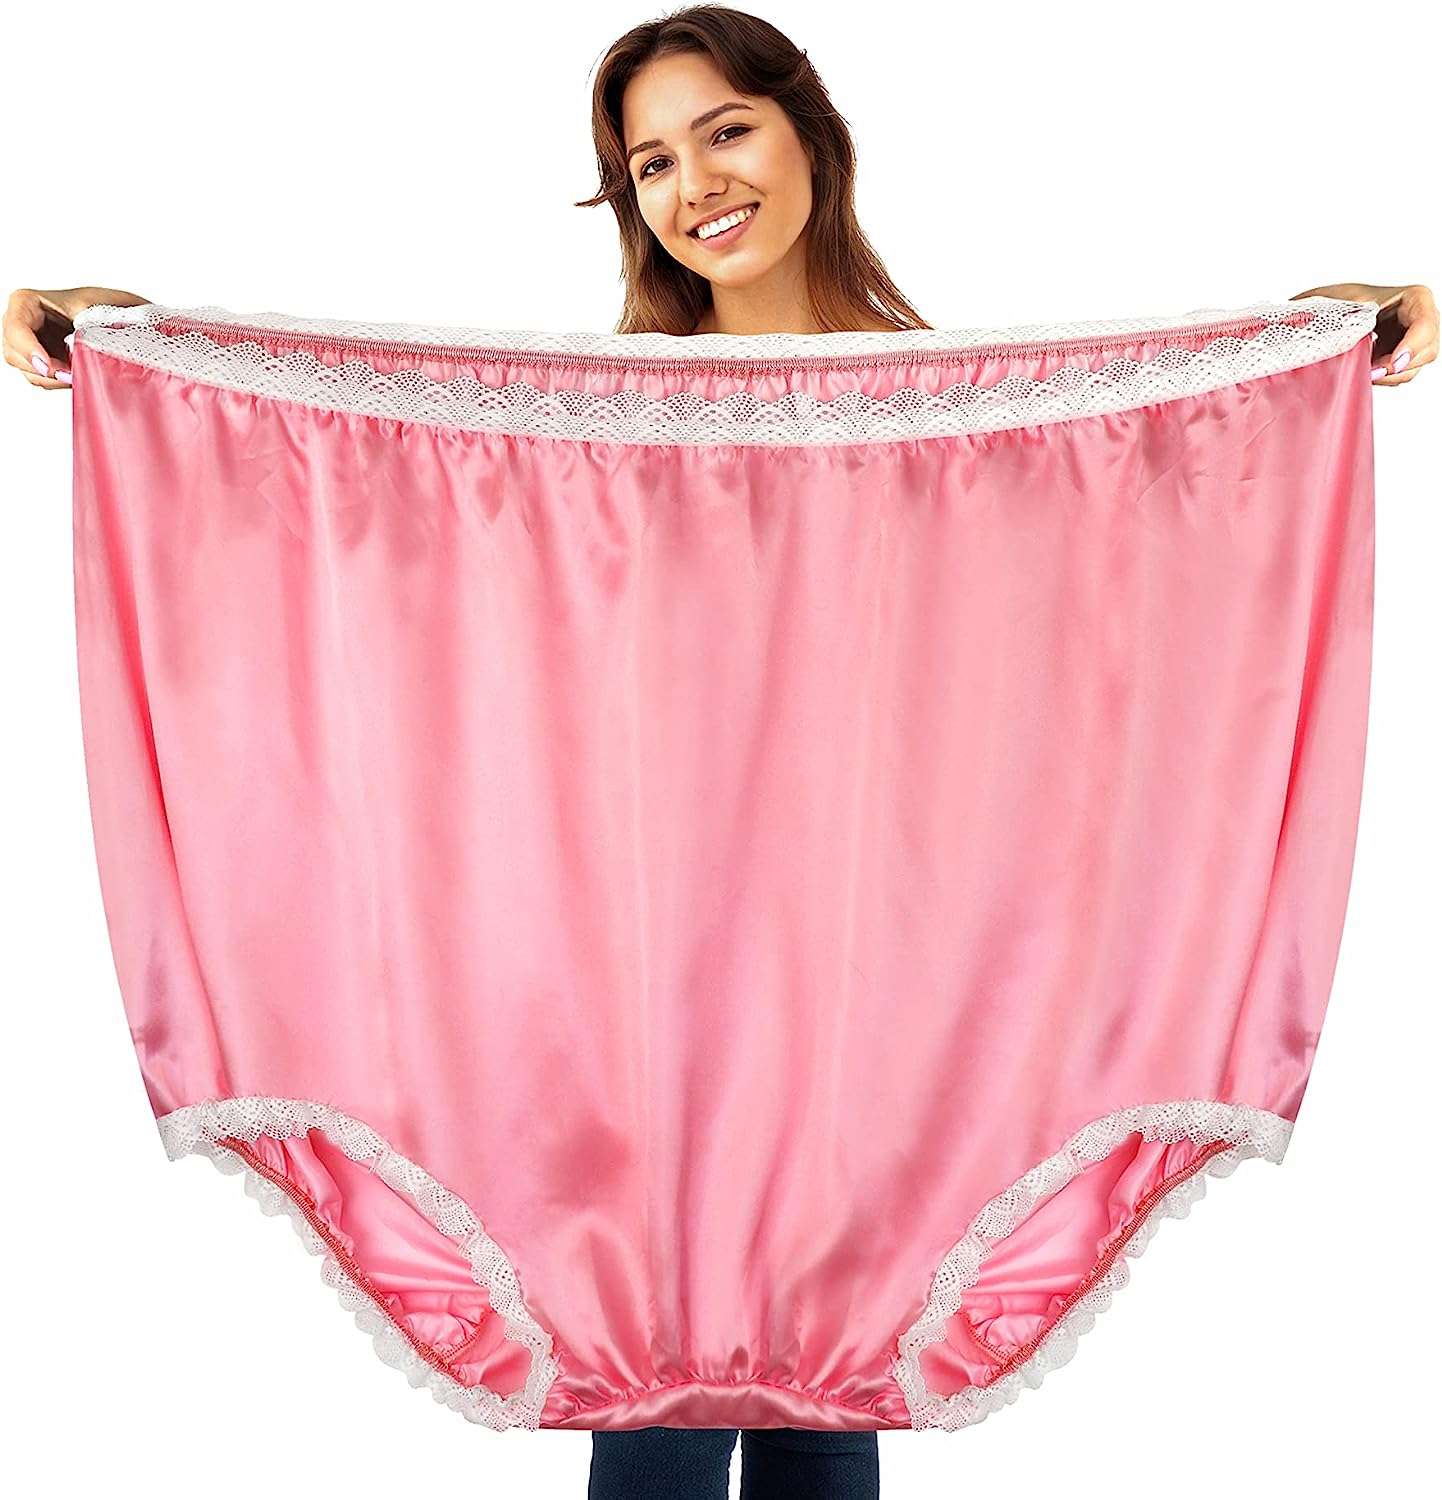 Funny Underwear - Get a Laugh with Our Giant Undies! - GetShopMe